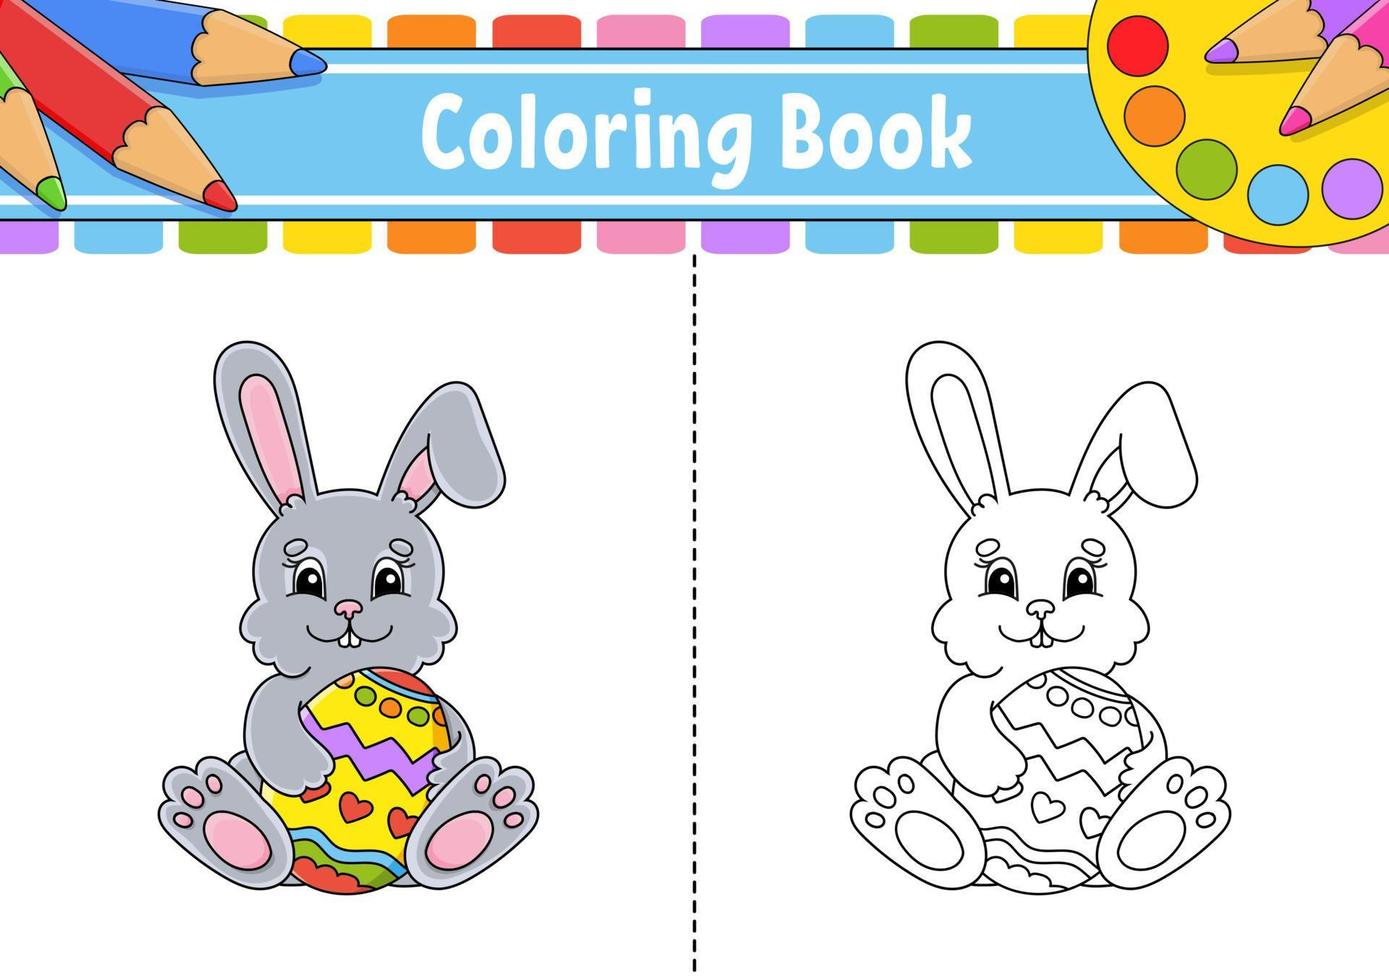 Coloring page for kids. cartoon character. Vector illustration. Easter theme. Black contour silhouette. Isolated on white background.